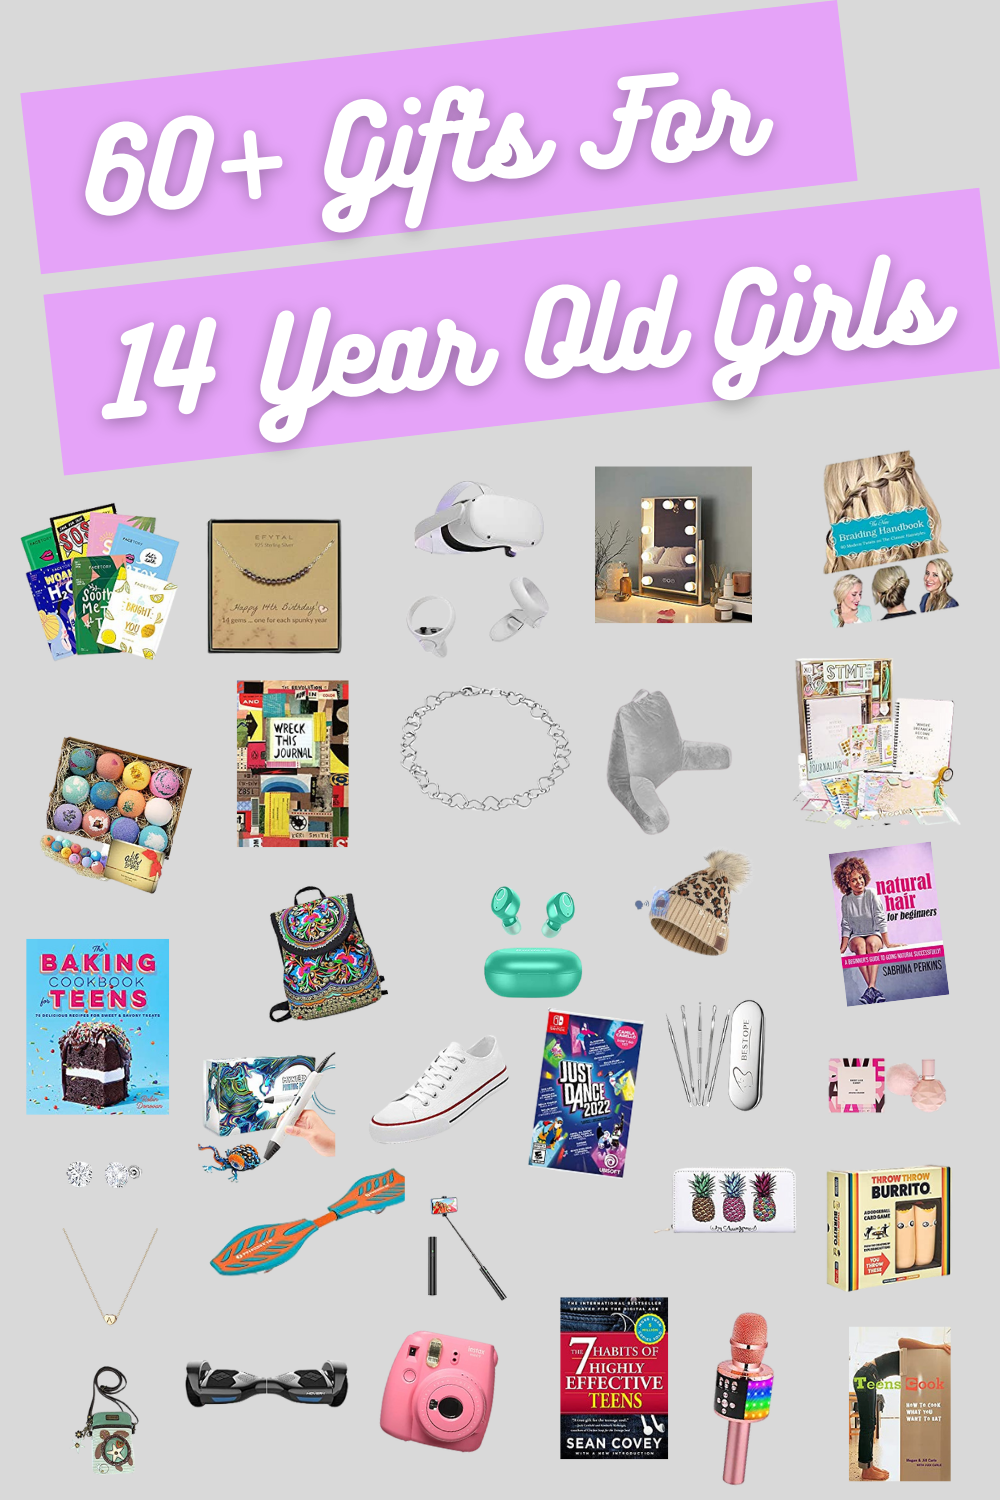 14 Years Of Being Awesome - Splendid 14th Birthday Gift Ideas